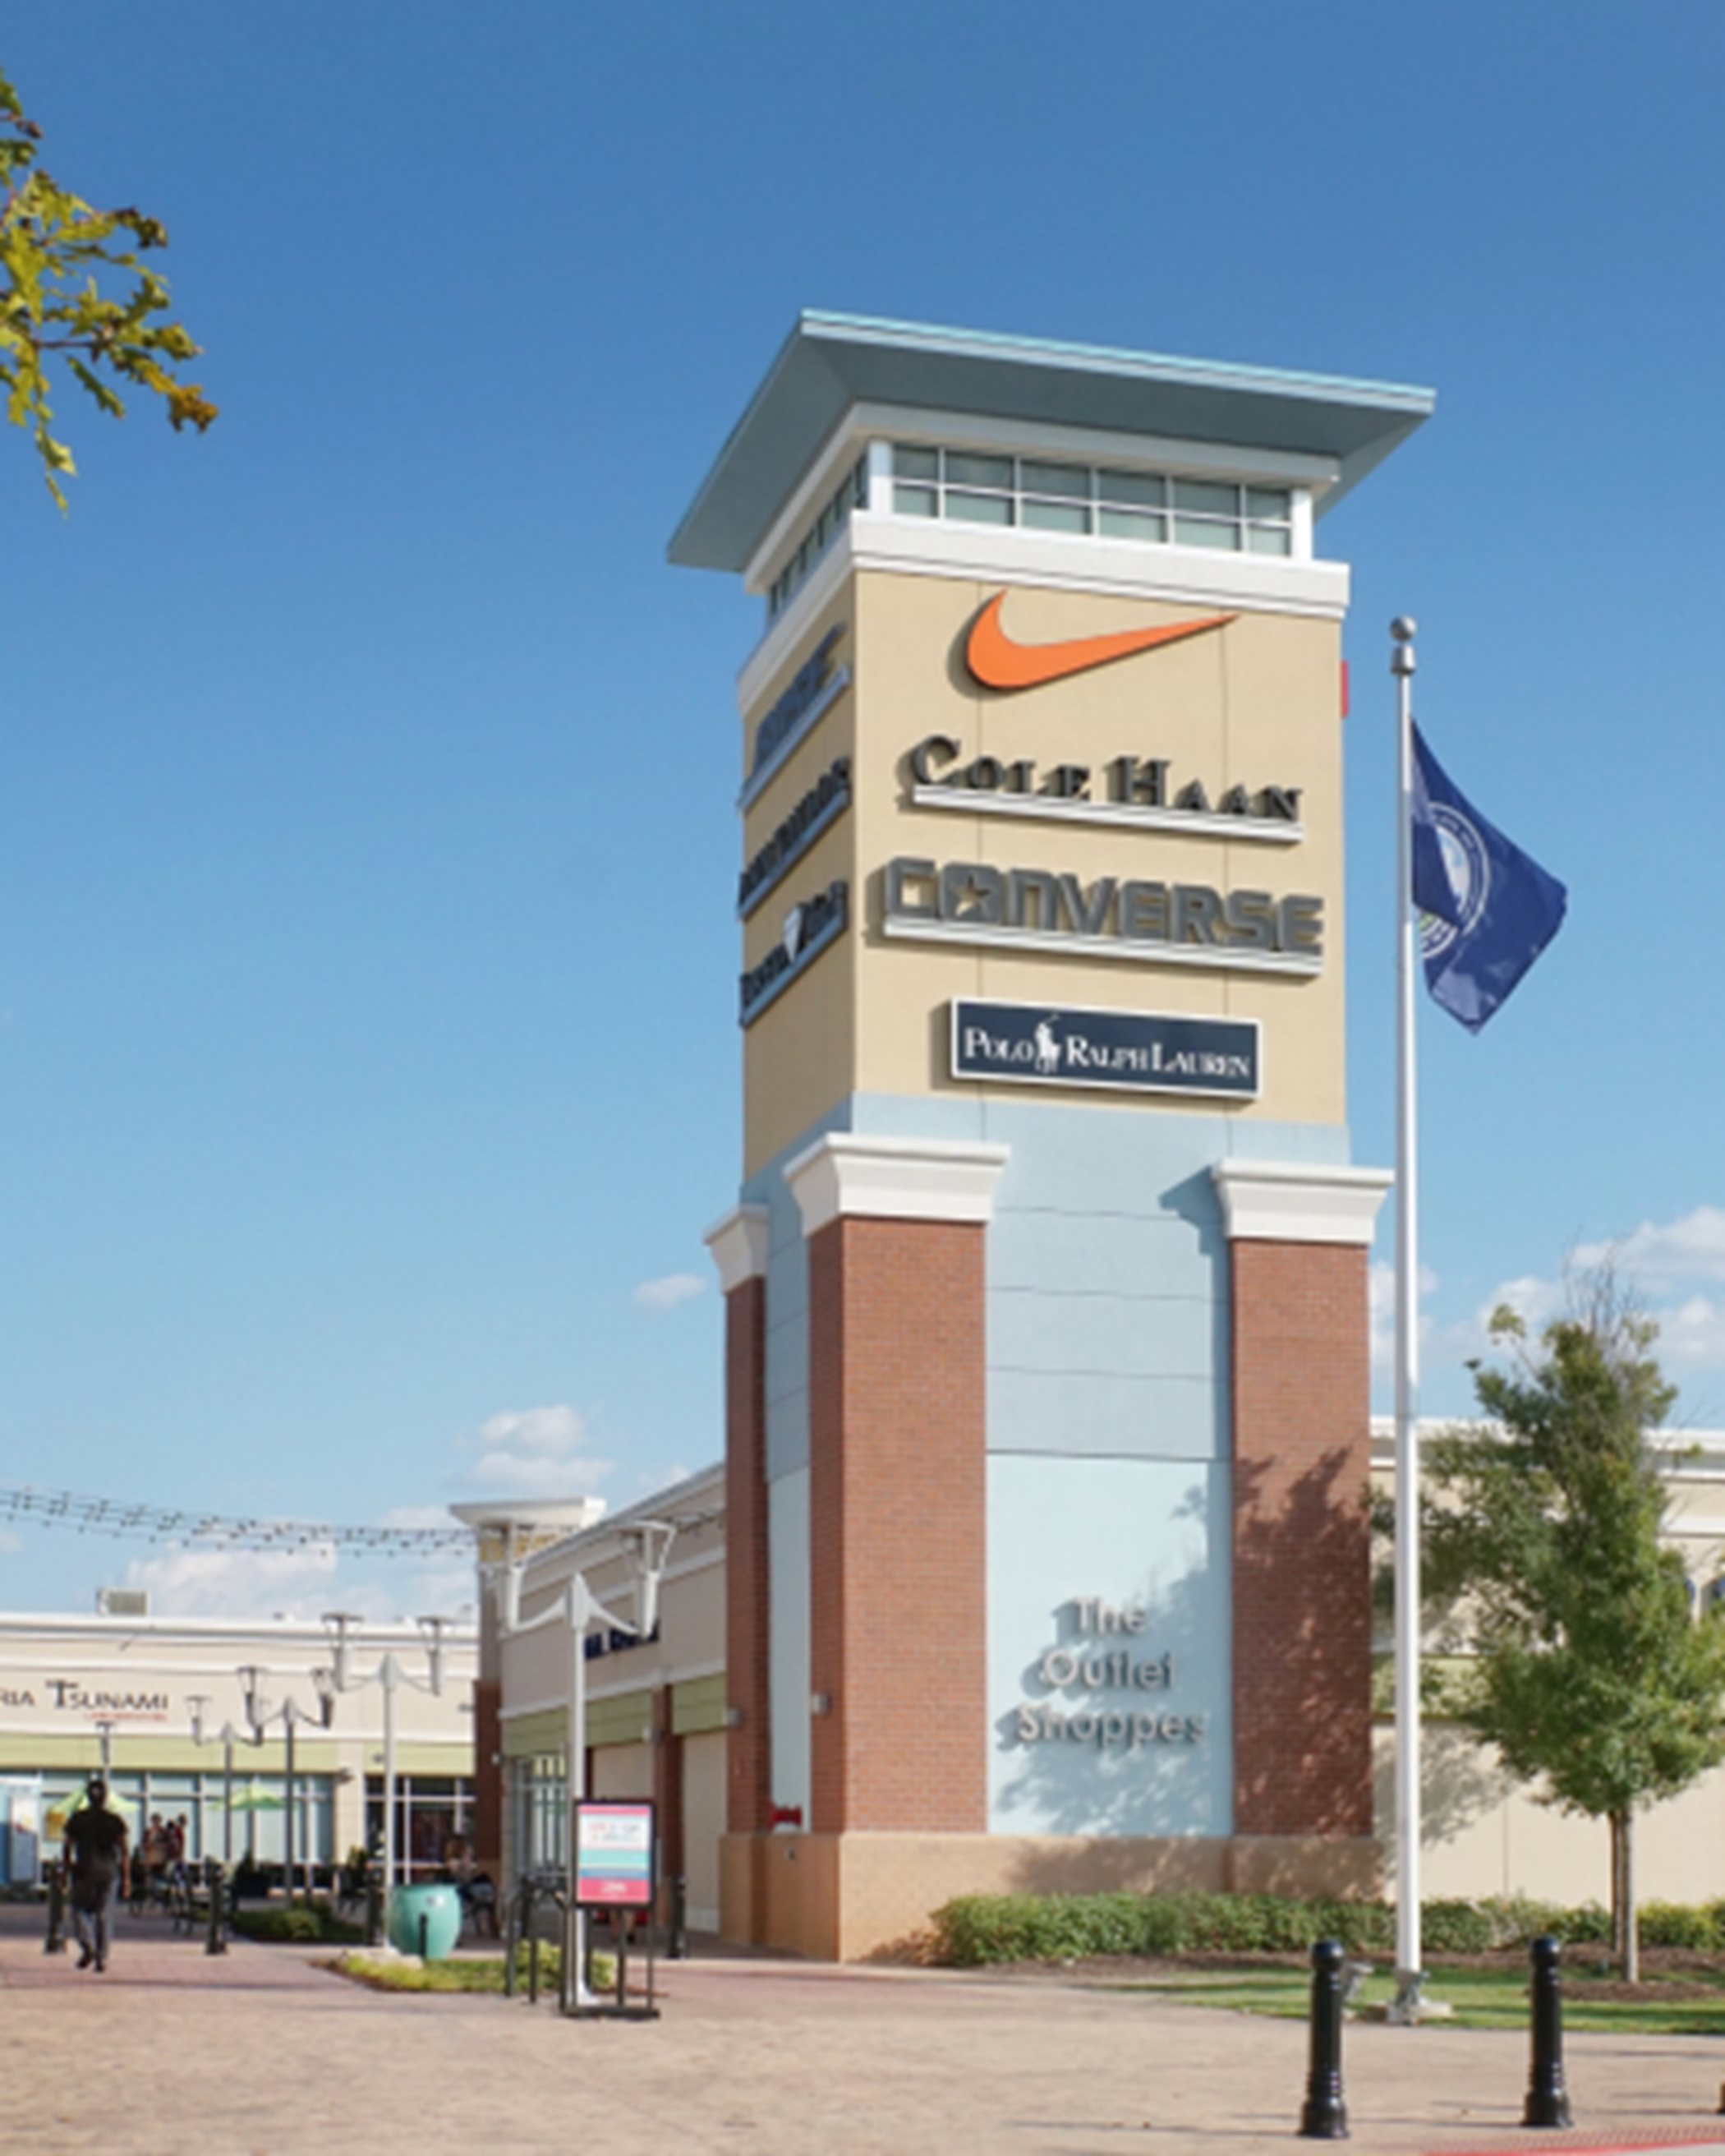 The Outlet Shoppes are situated conveniently close by